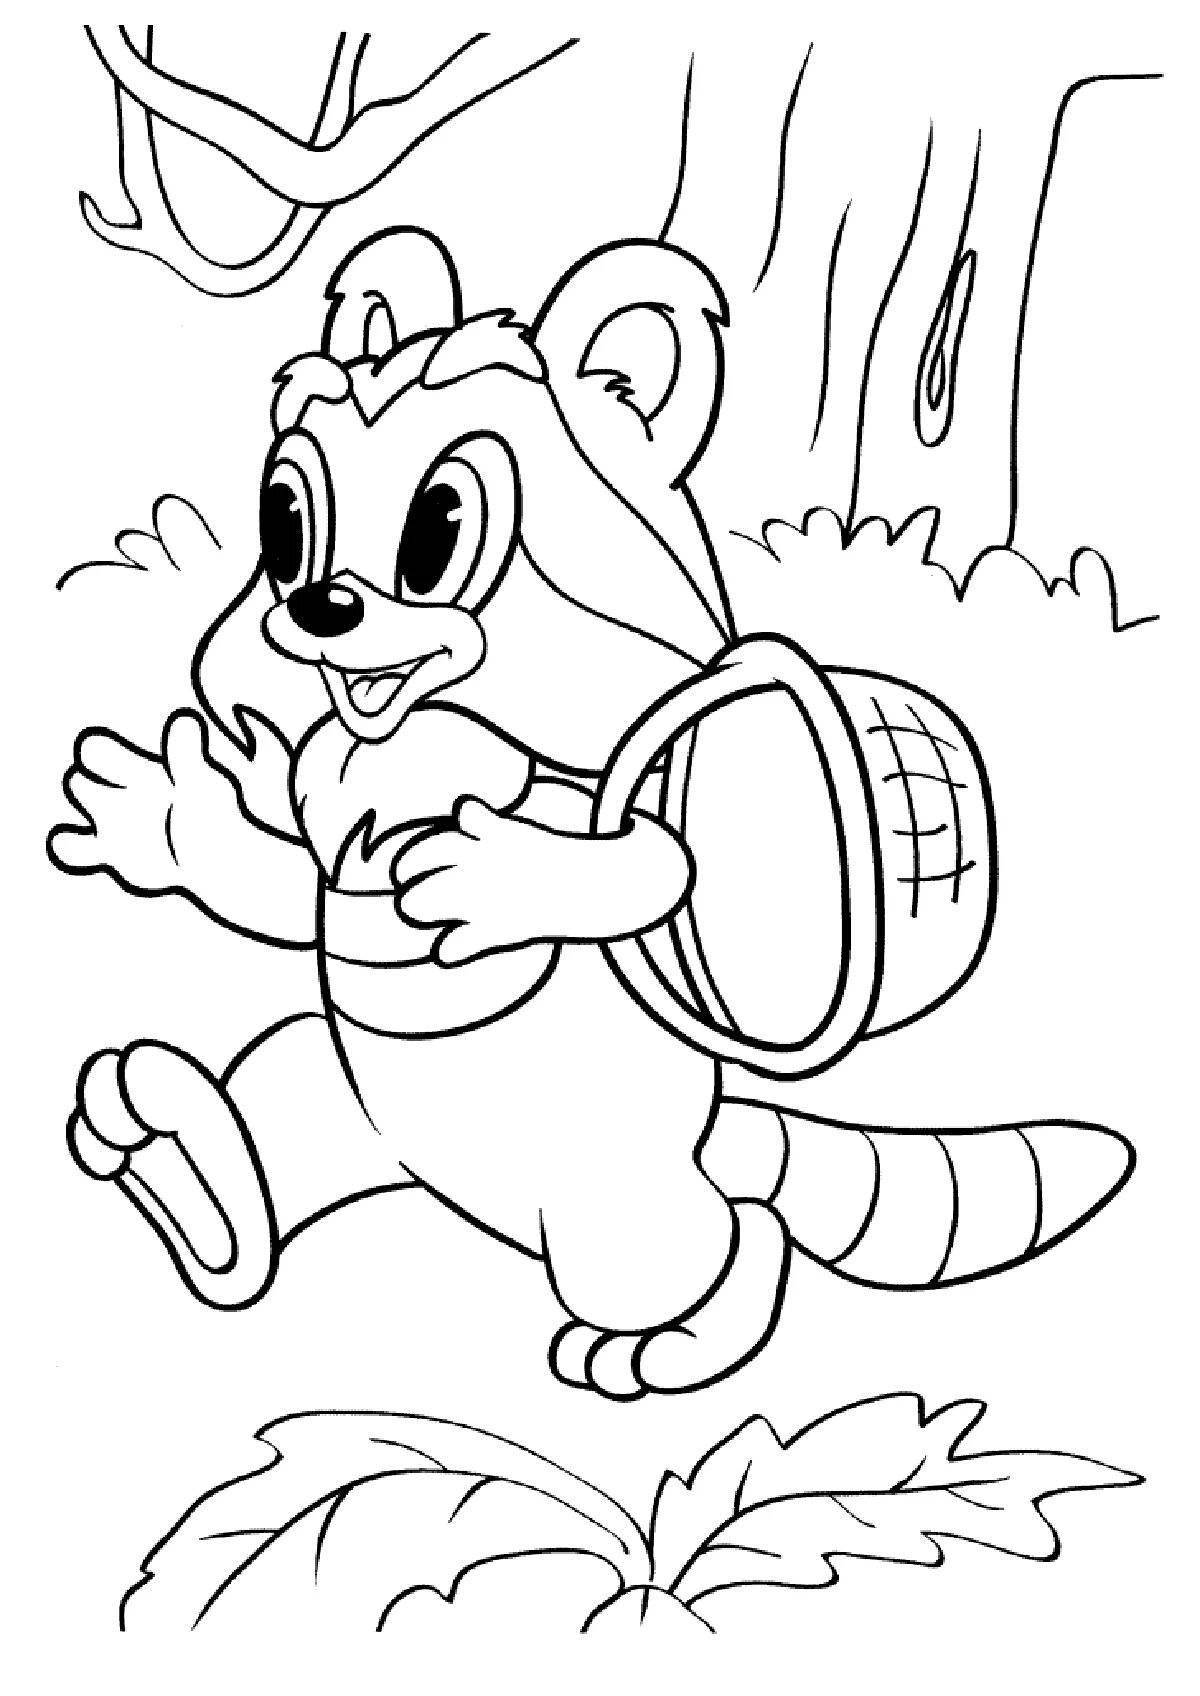 Coloring page exotic raccoon